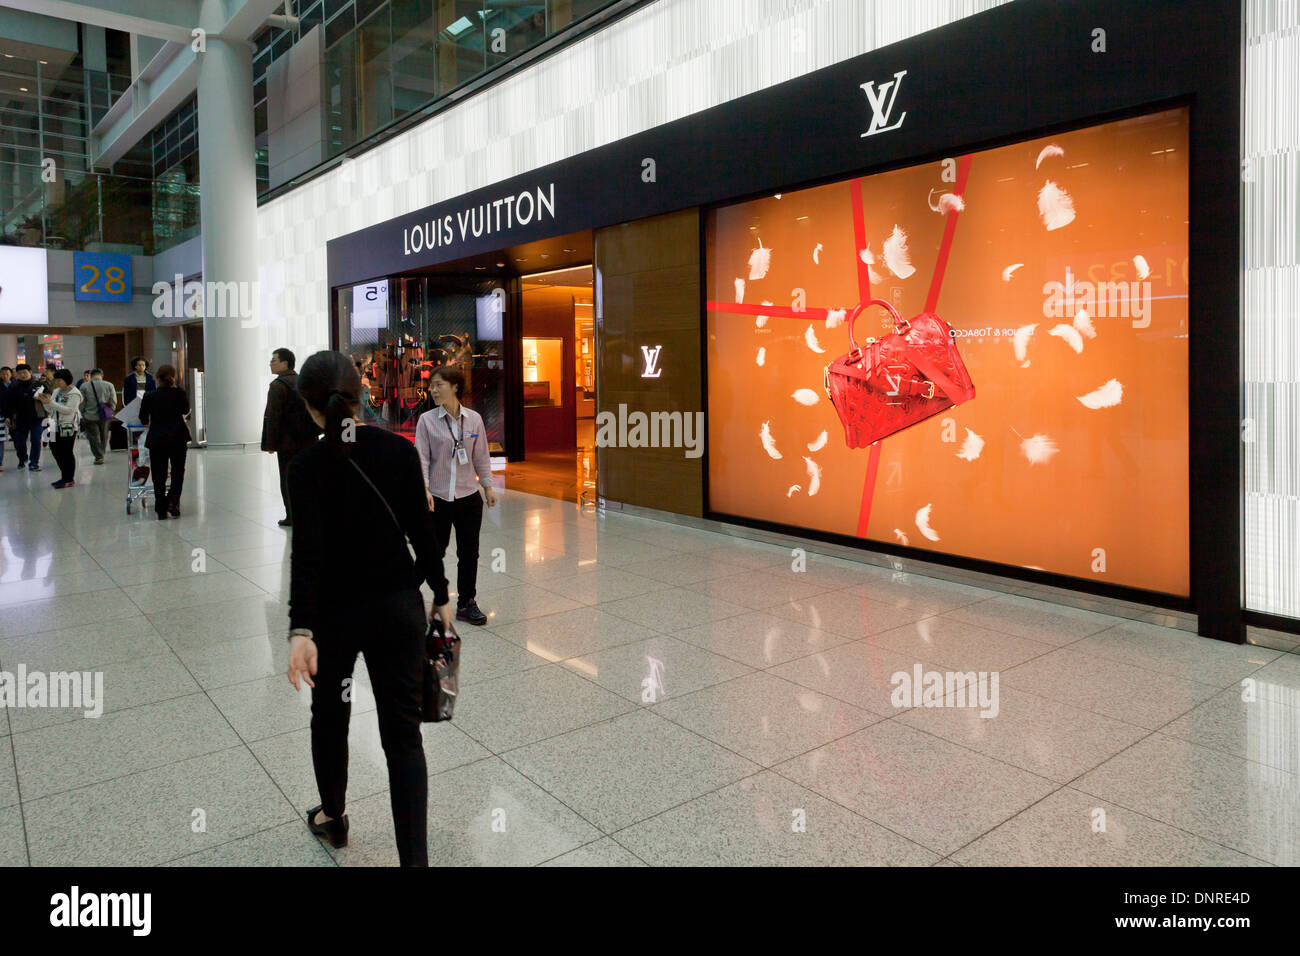 Louis Vuitton Store Inside Incheon International Airport South Korea Stock  Photo - Download Image Now - iStock